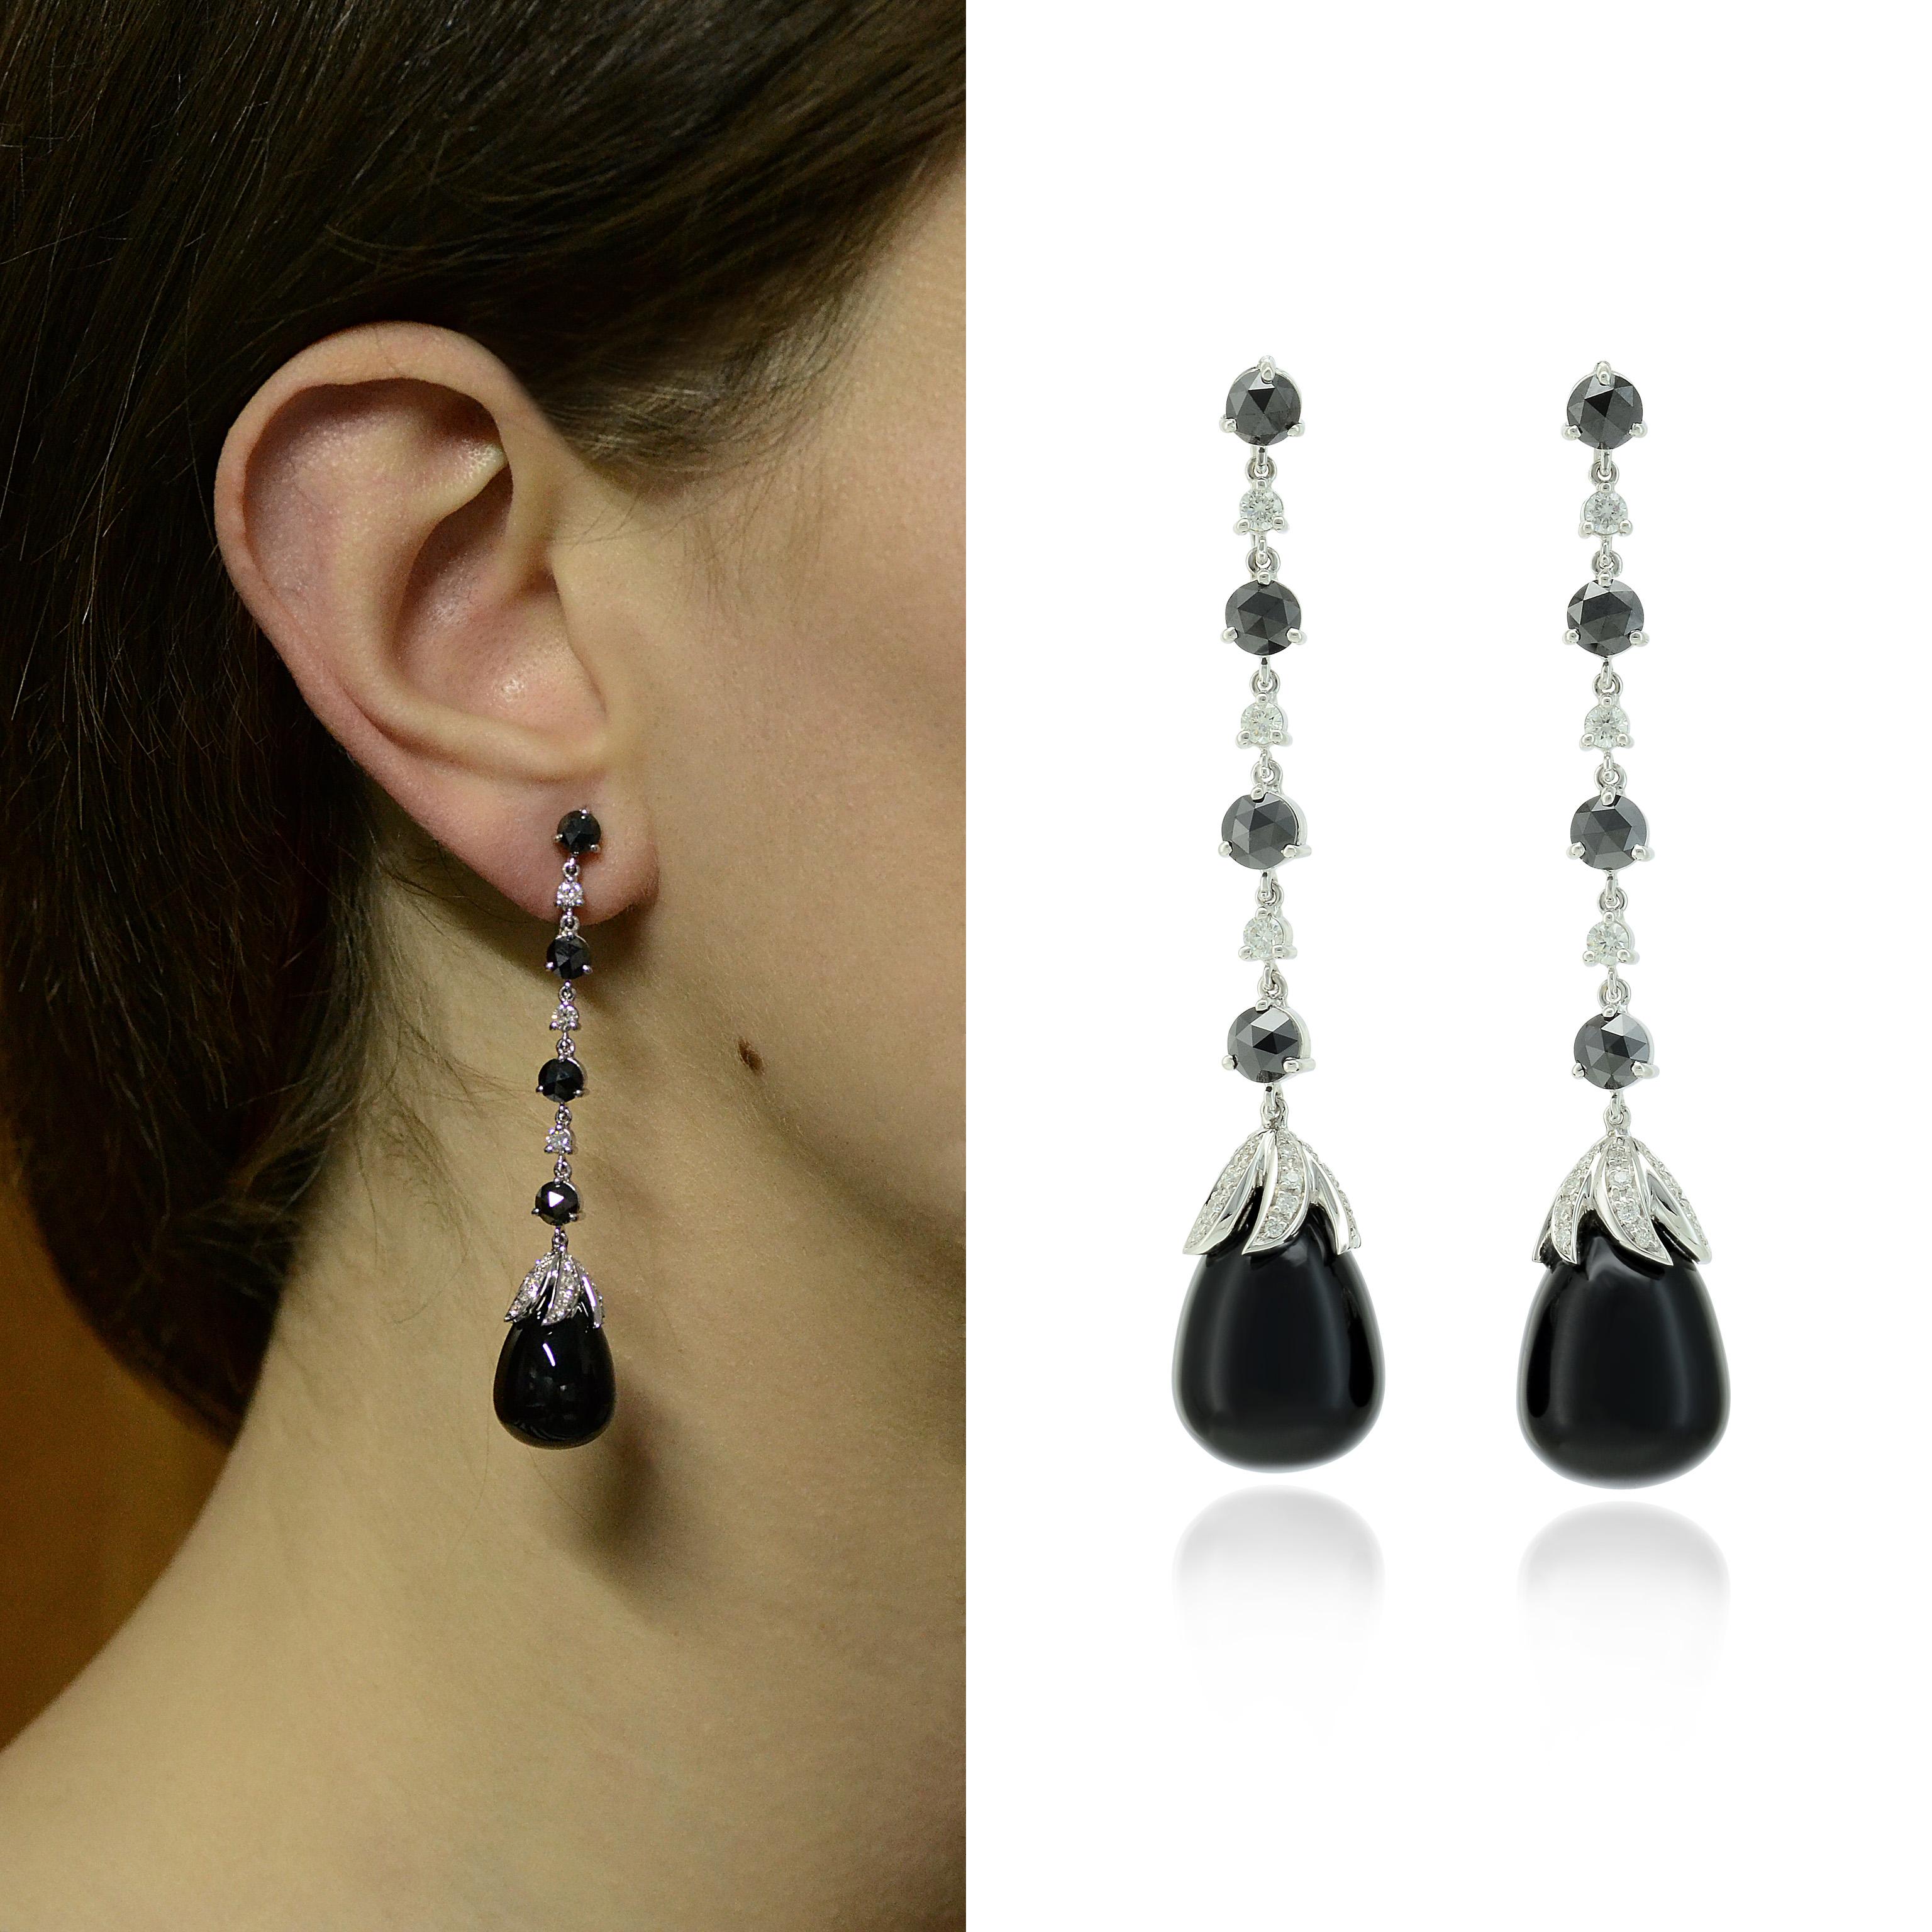 Handcrafted in Italy, in Margherita Burgener family workshop, the flexible long earrings feature a rose cut black diamond alternate to a colorless round diamond, ending by a onyx cabochon drop with diamond pavé set leaves motif. 

Fitting and